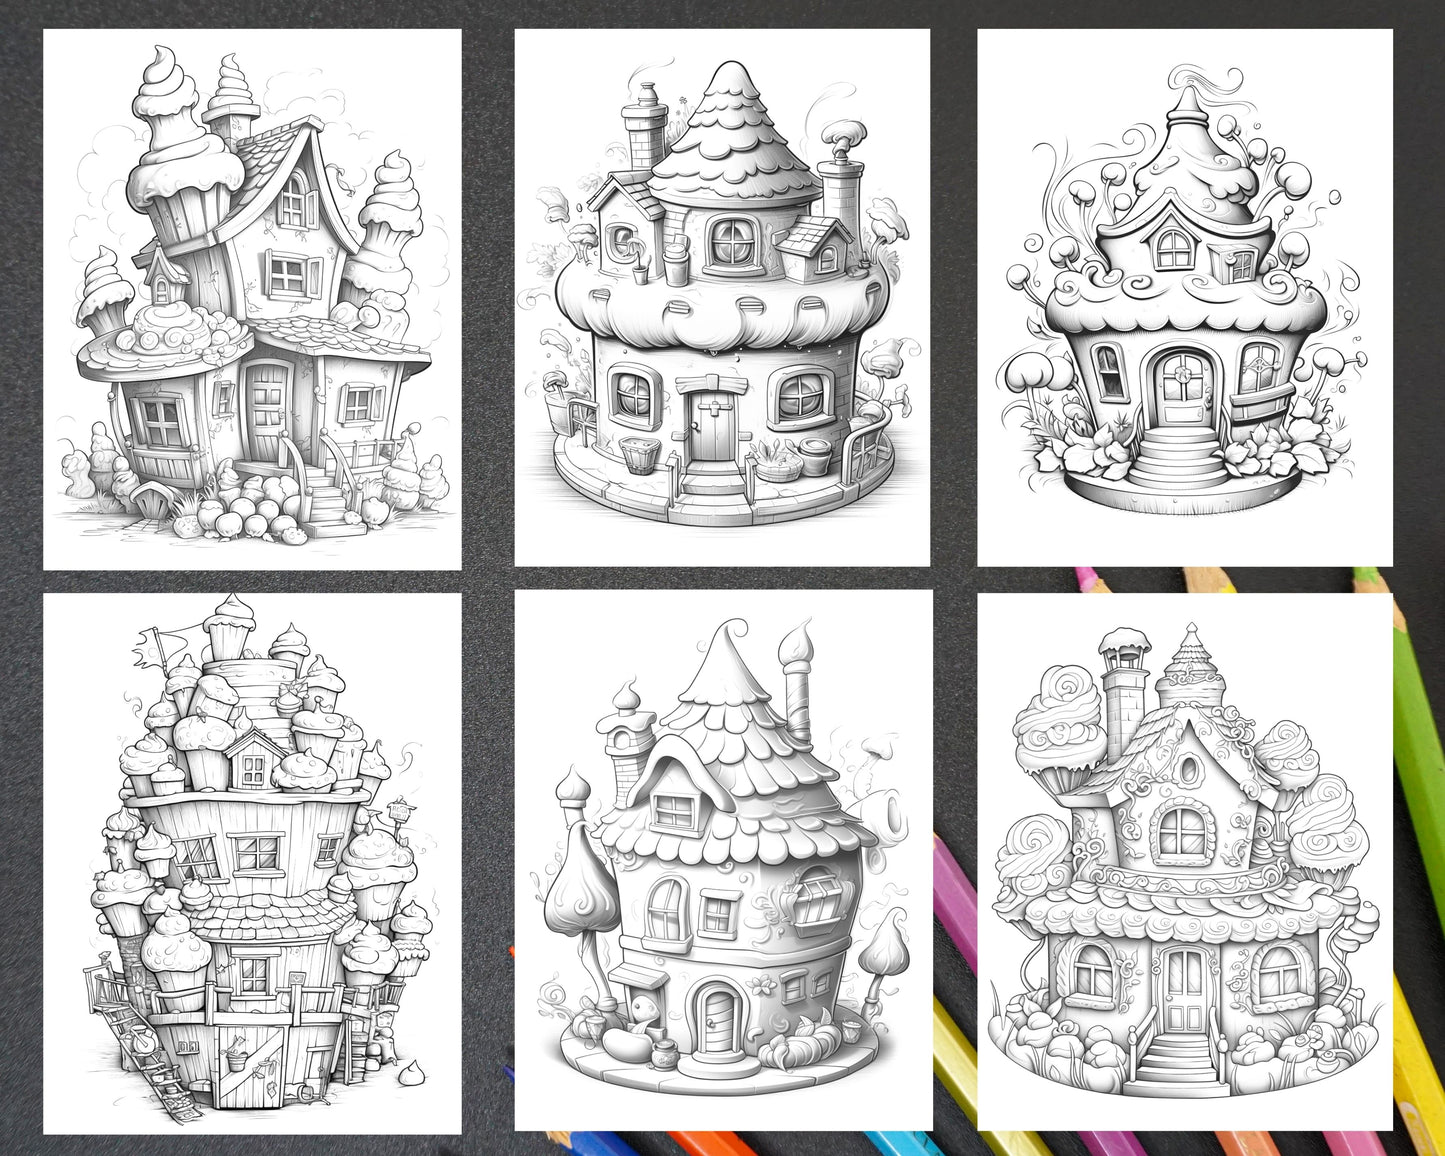 grayscale coloring pages, cake houses coloring, printable coloring pages, adult and kids coloring, cake illustrations